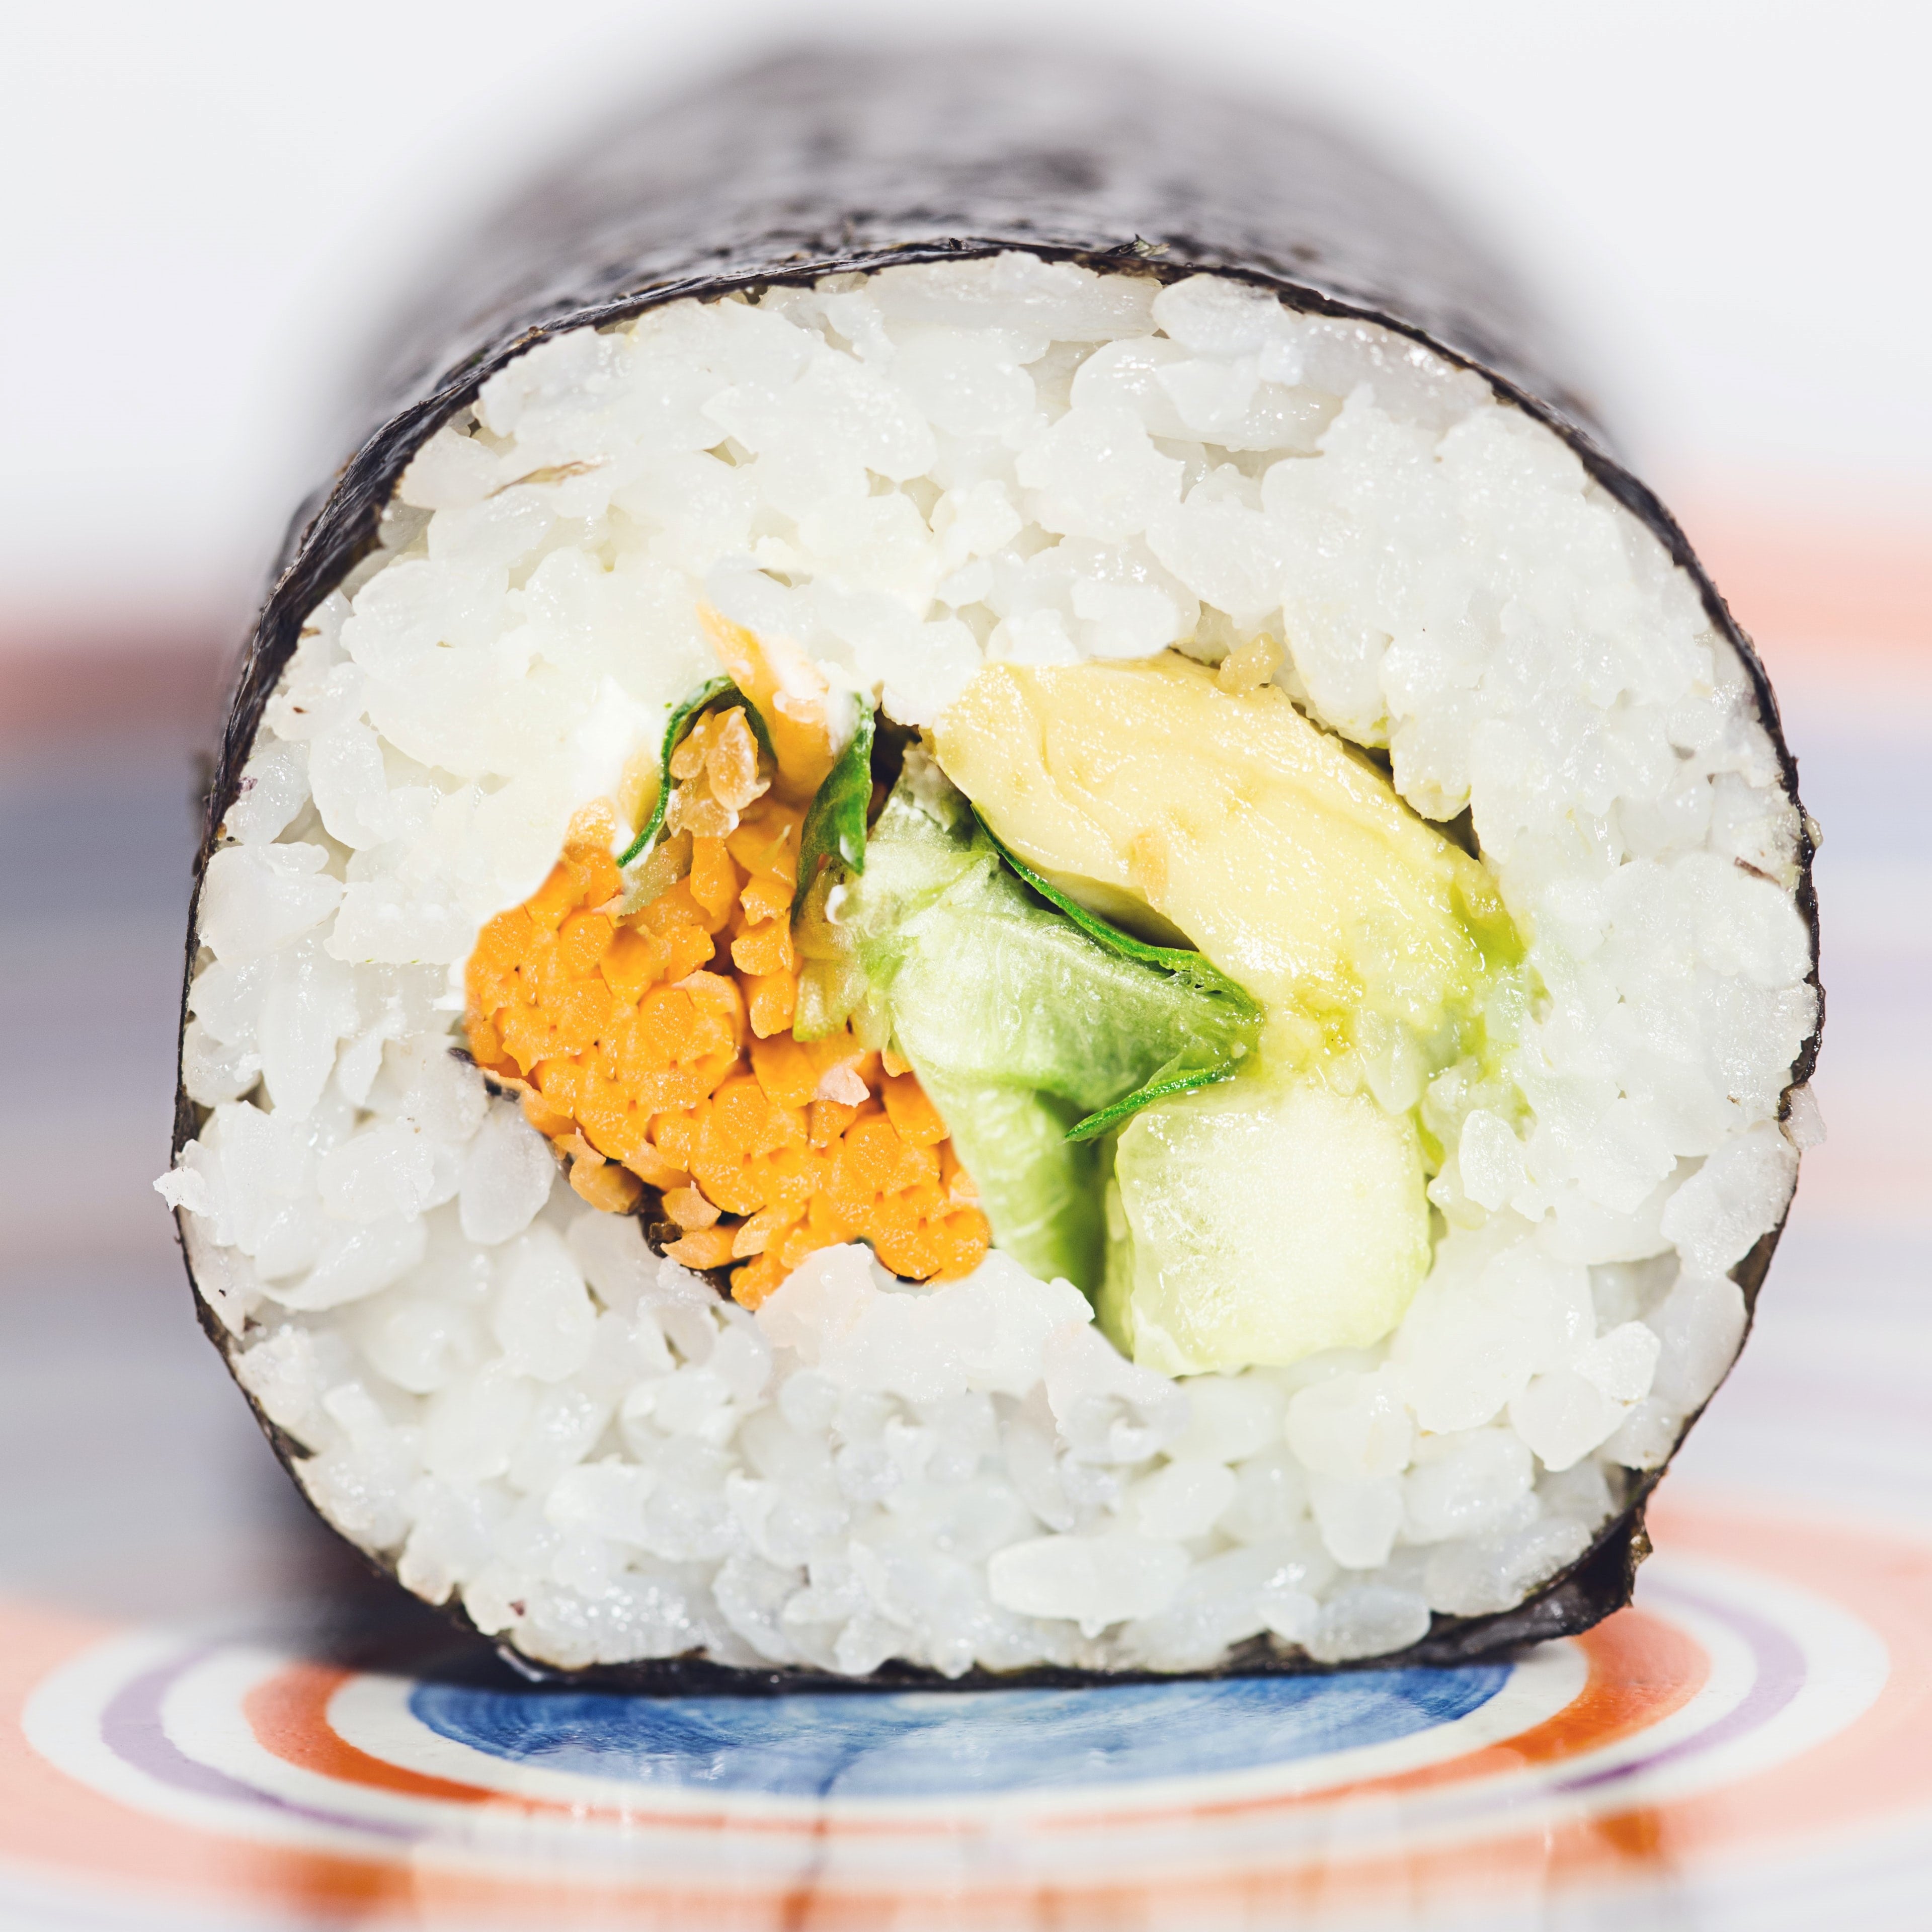 How to cook your sushi rice?